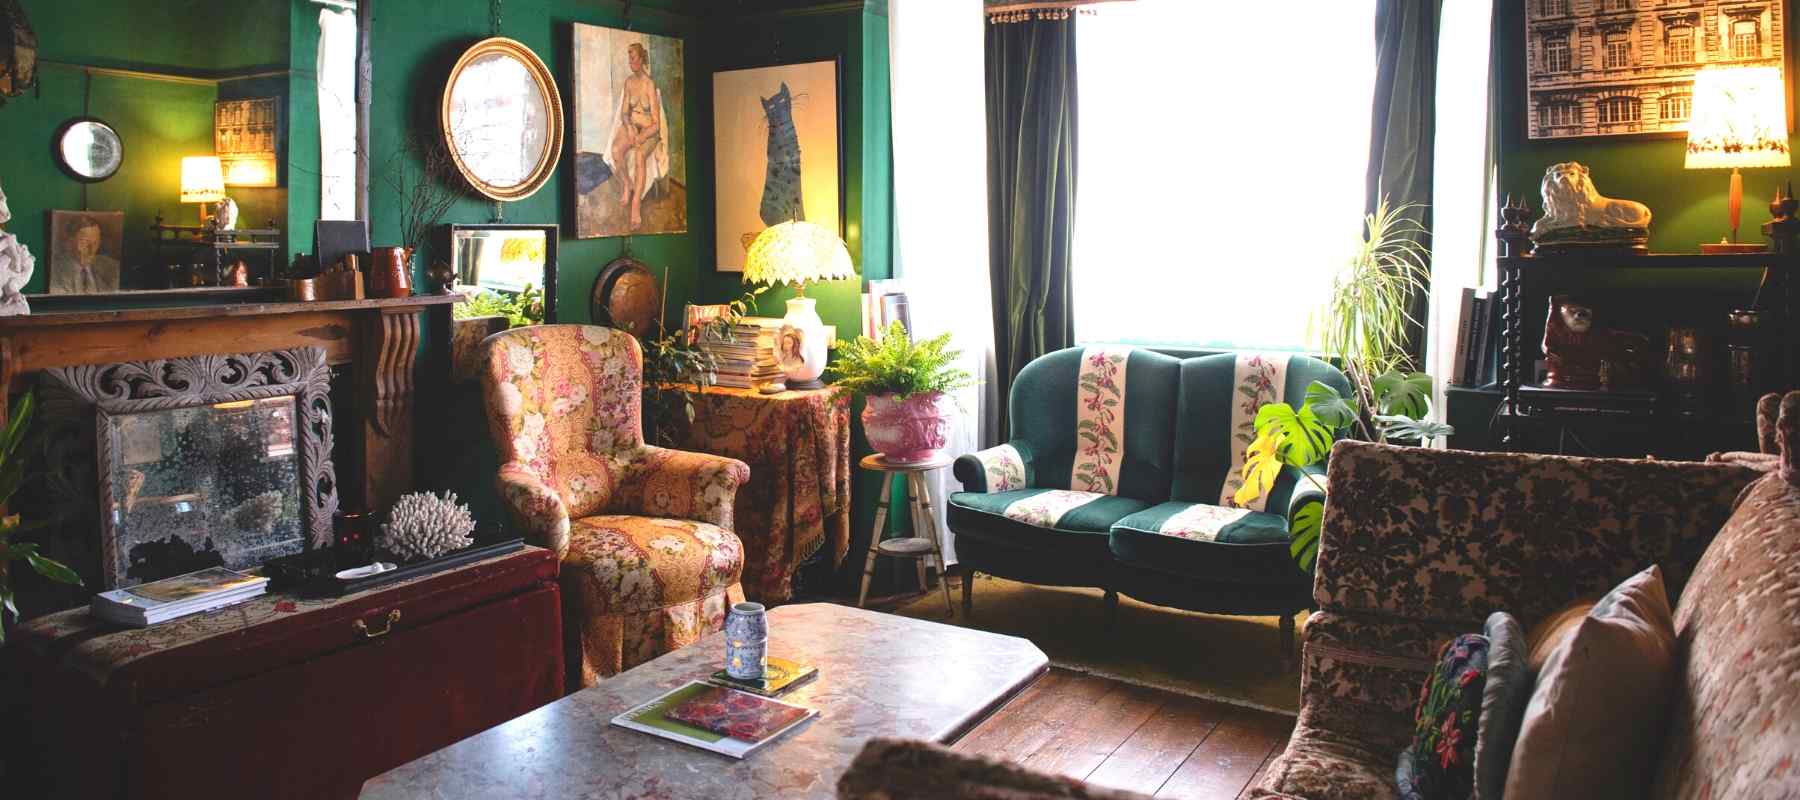 Green lounge decorated with vintage wooden furniture